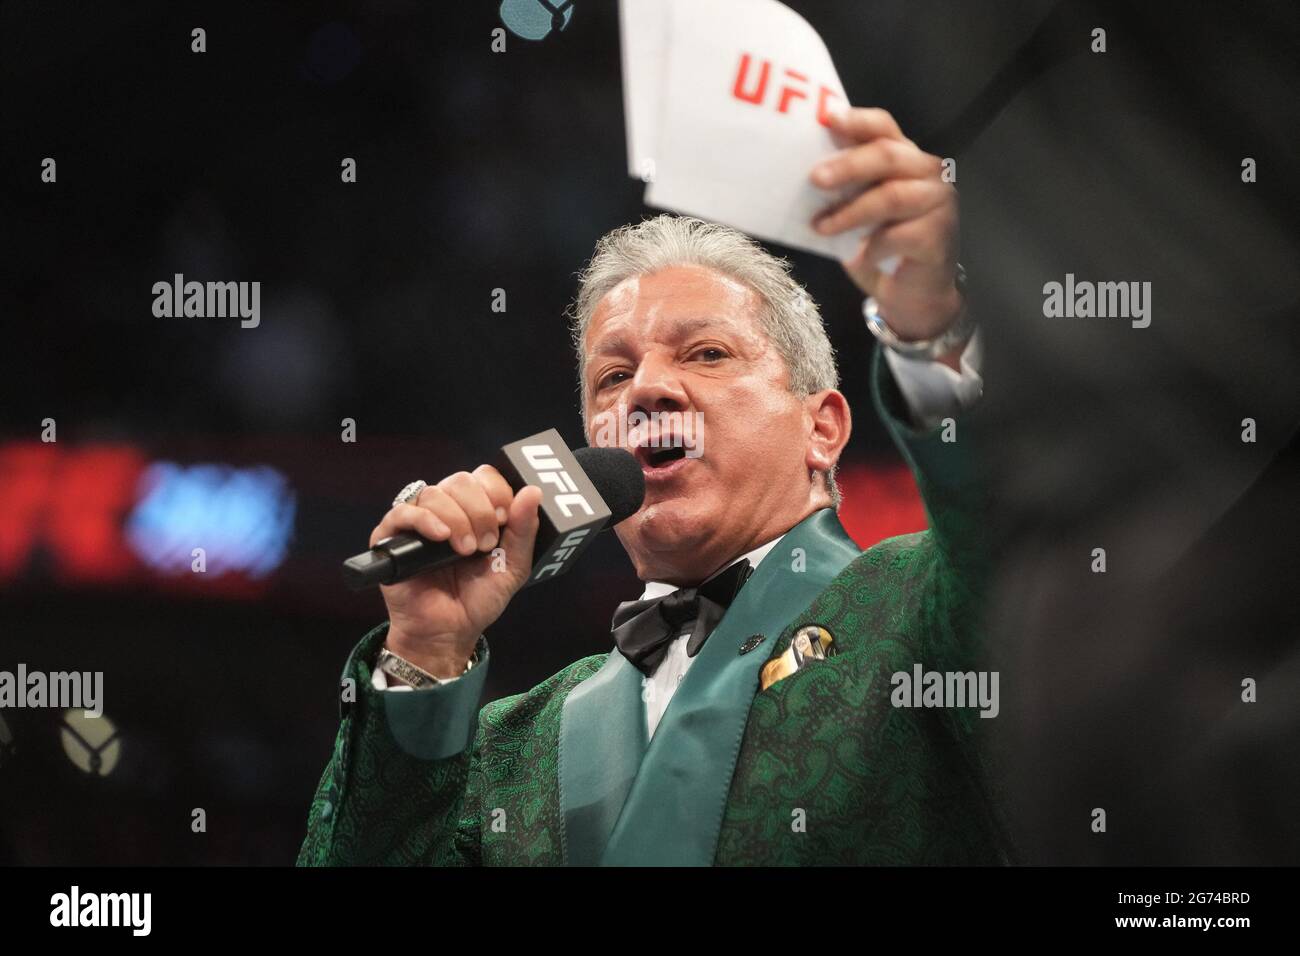 Las Vegas, United States. 10th July, 2021. Bruce Buffer, the official octagon announcer during the UFC 264 - Poirier vs McGregor 3 event at T-Mobile Arena on July 10, 2021 in Las Vegas, NV, USA. Photo by Louis Grasse/PxImages/ABACAPRESS.COM Credit: Abaca Press/Alamy Live News Stock Photo